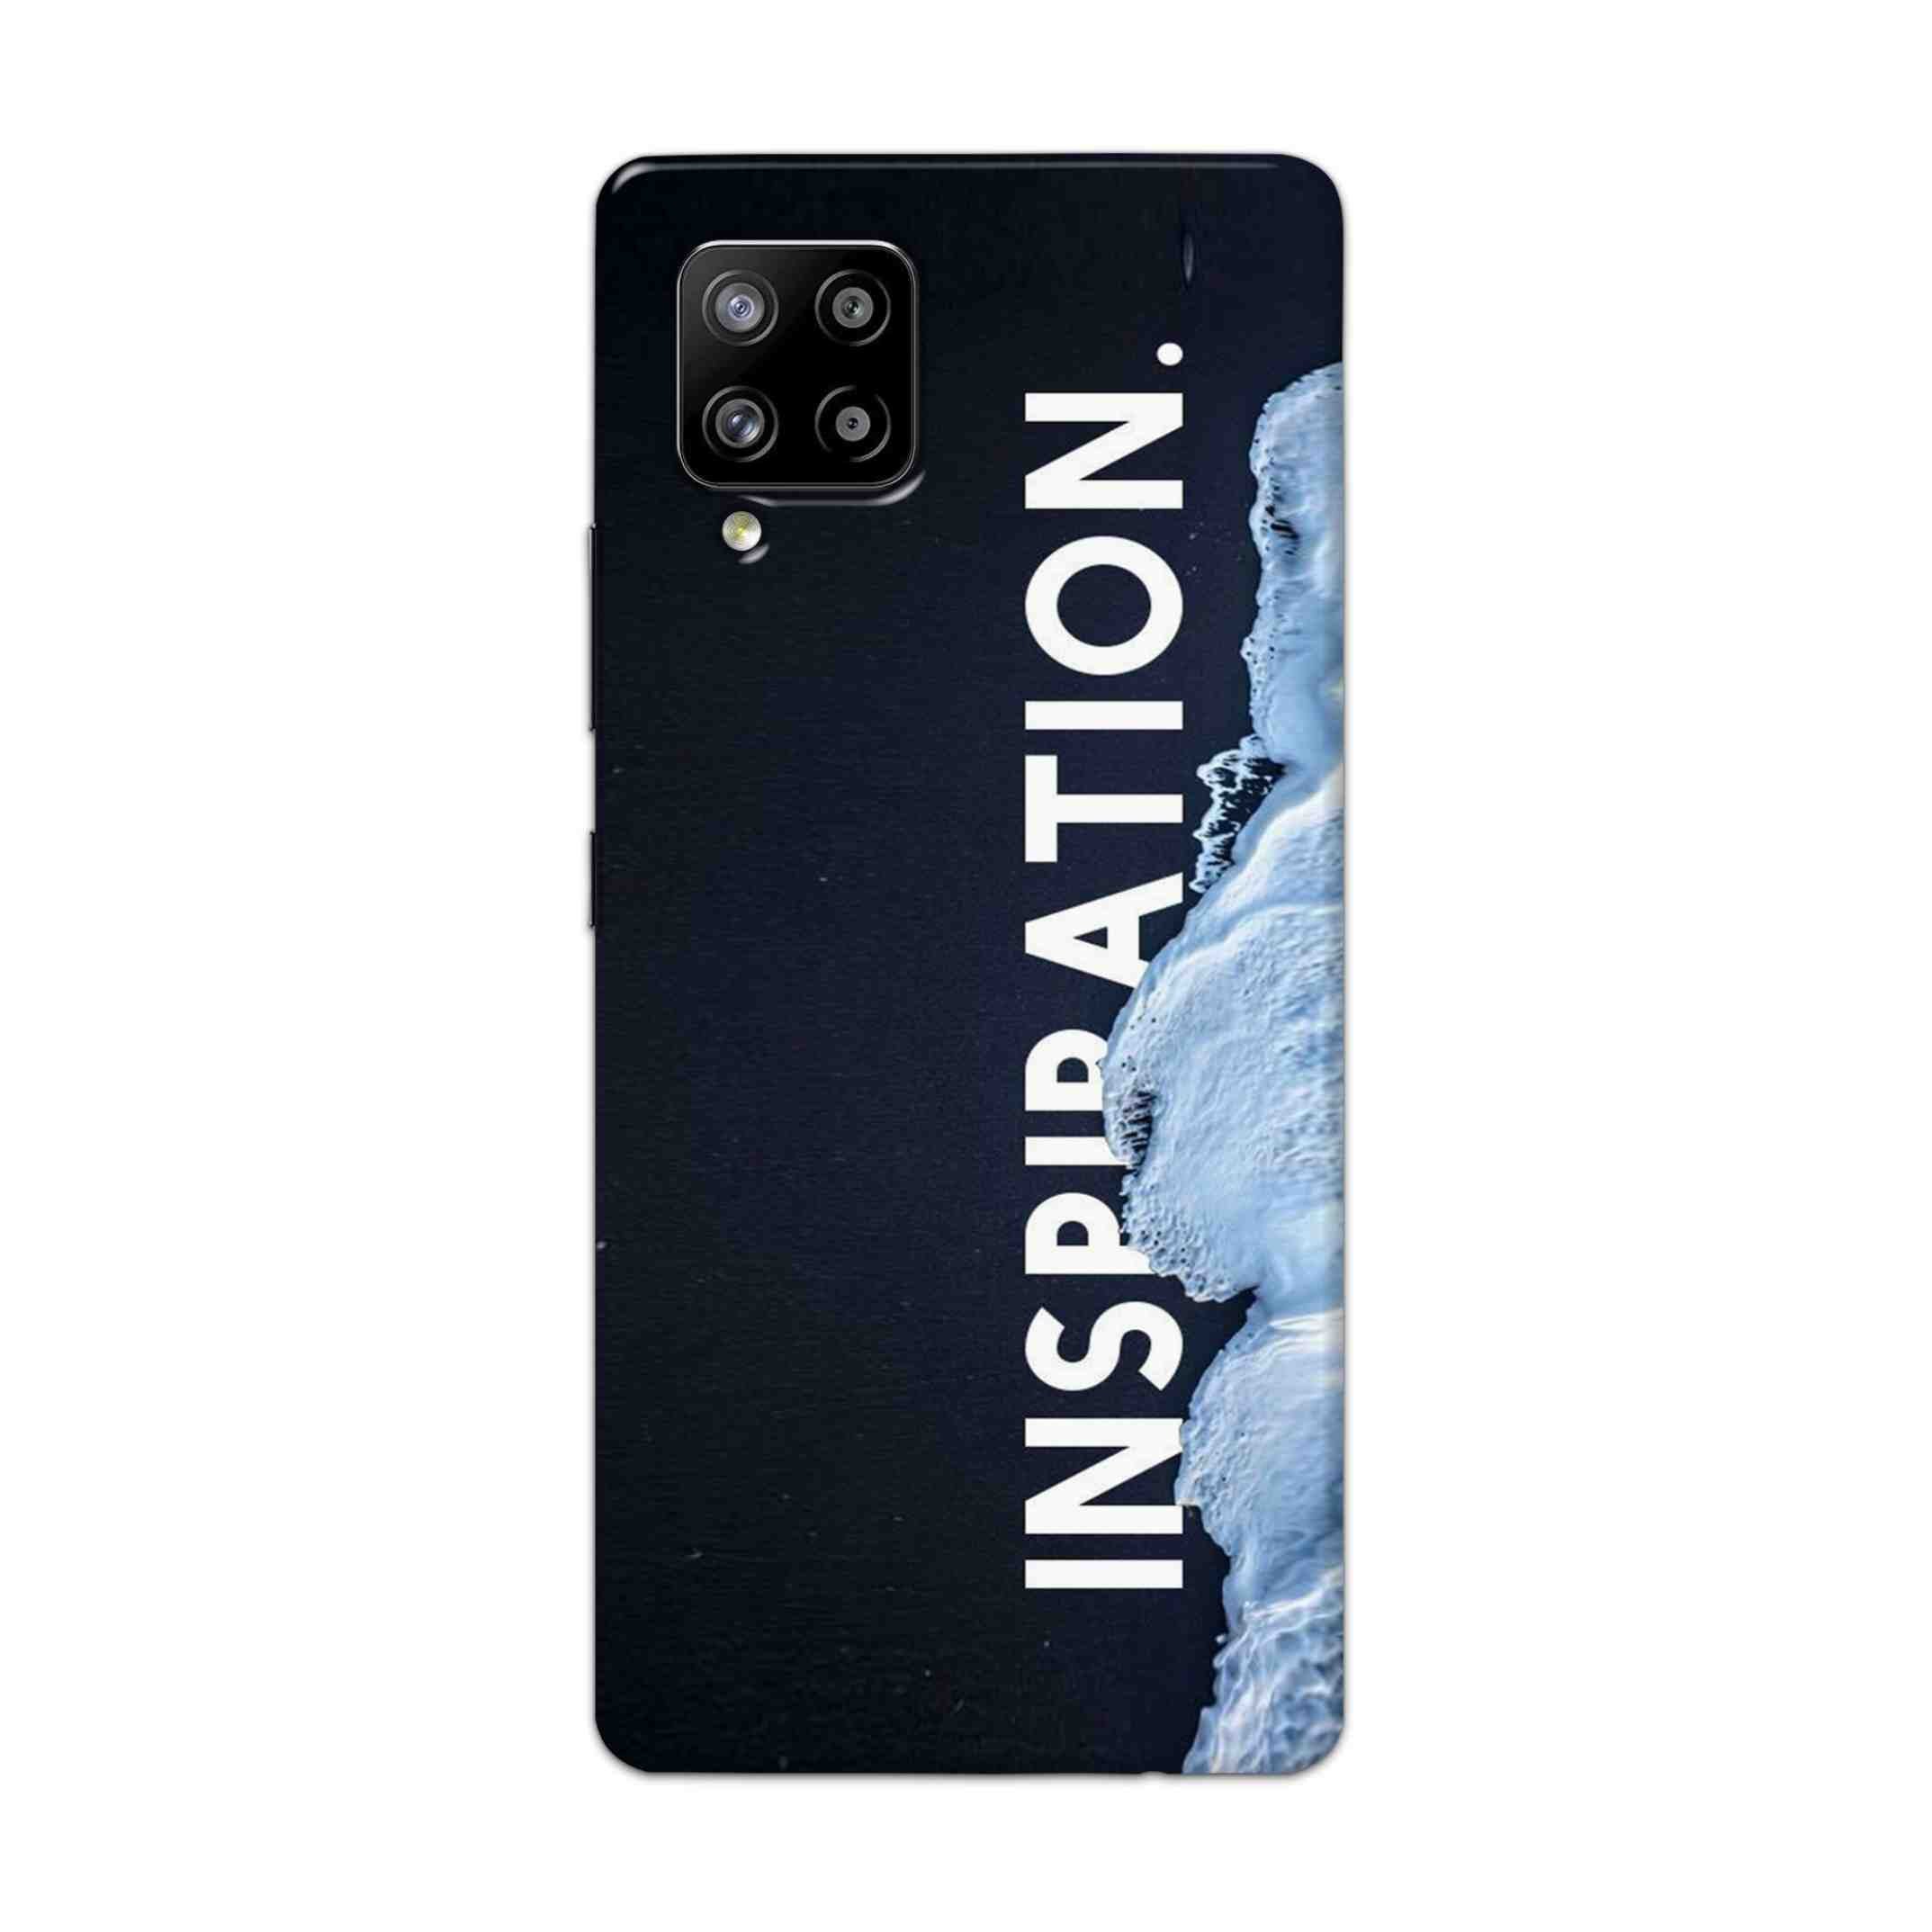 Buy Inspiration Hard Back Mobile Phone Case Cover For Samsung Galaxy M42 Online